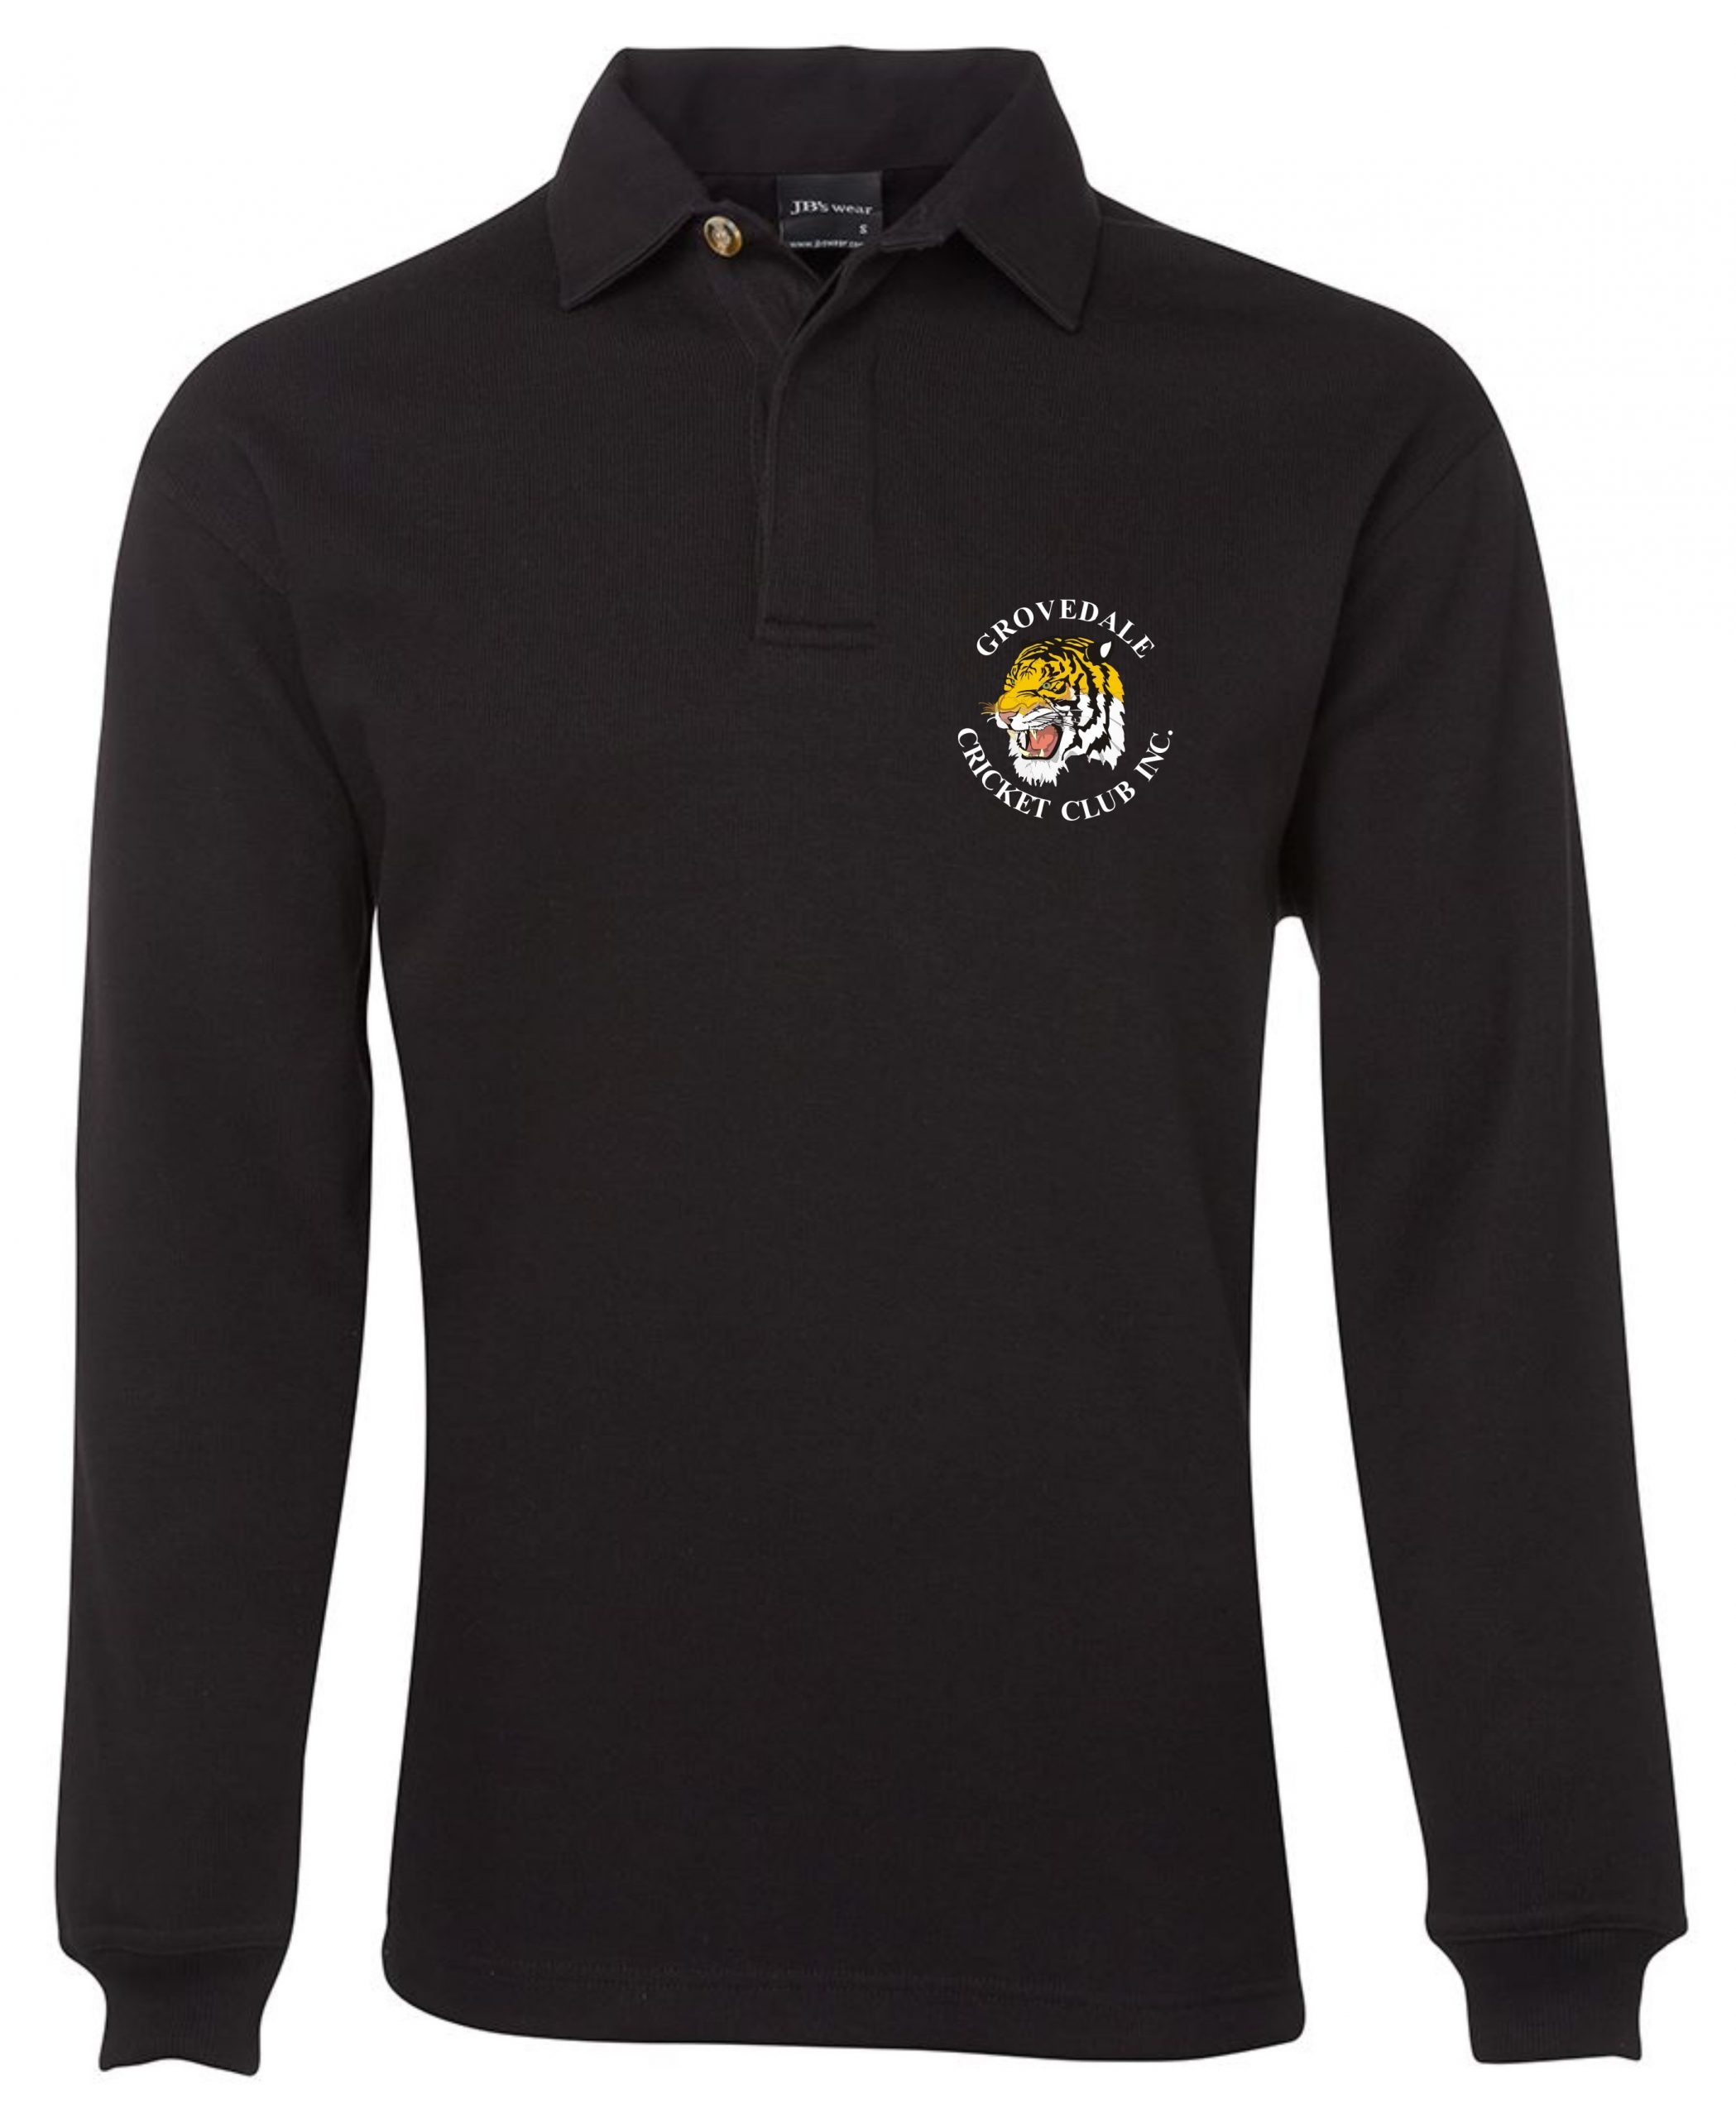 Adults Rugby top in Black